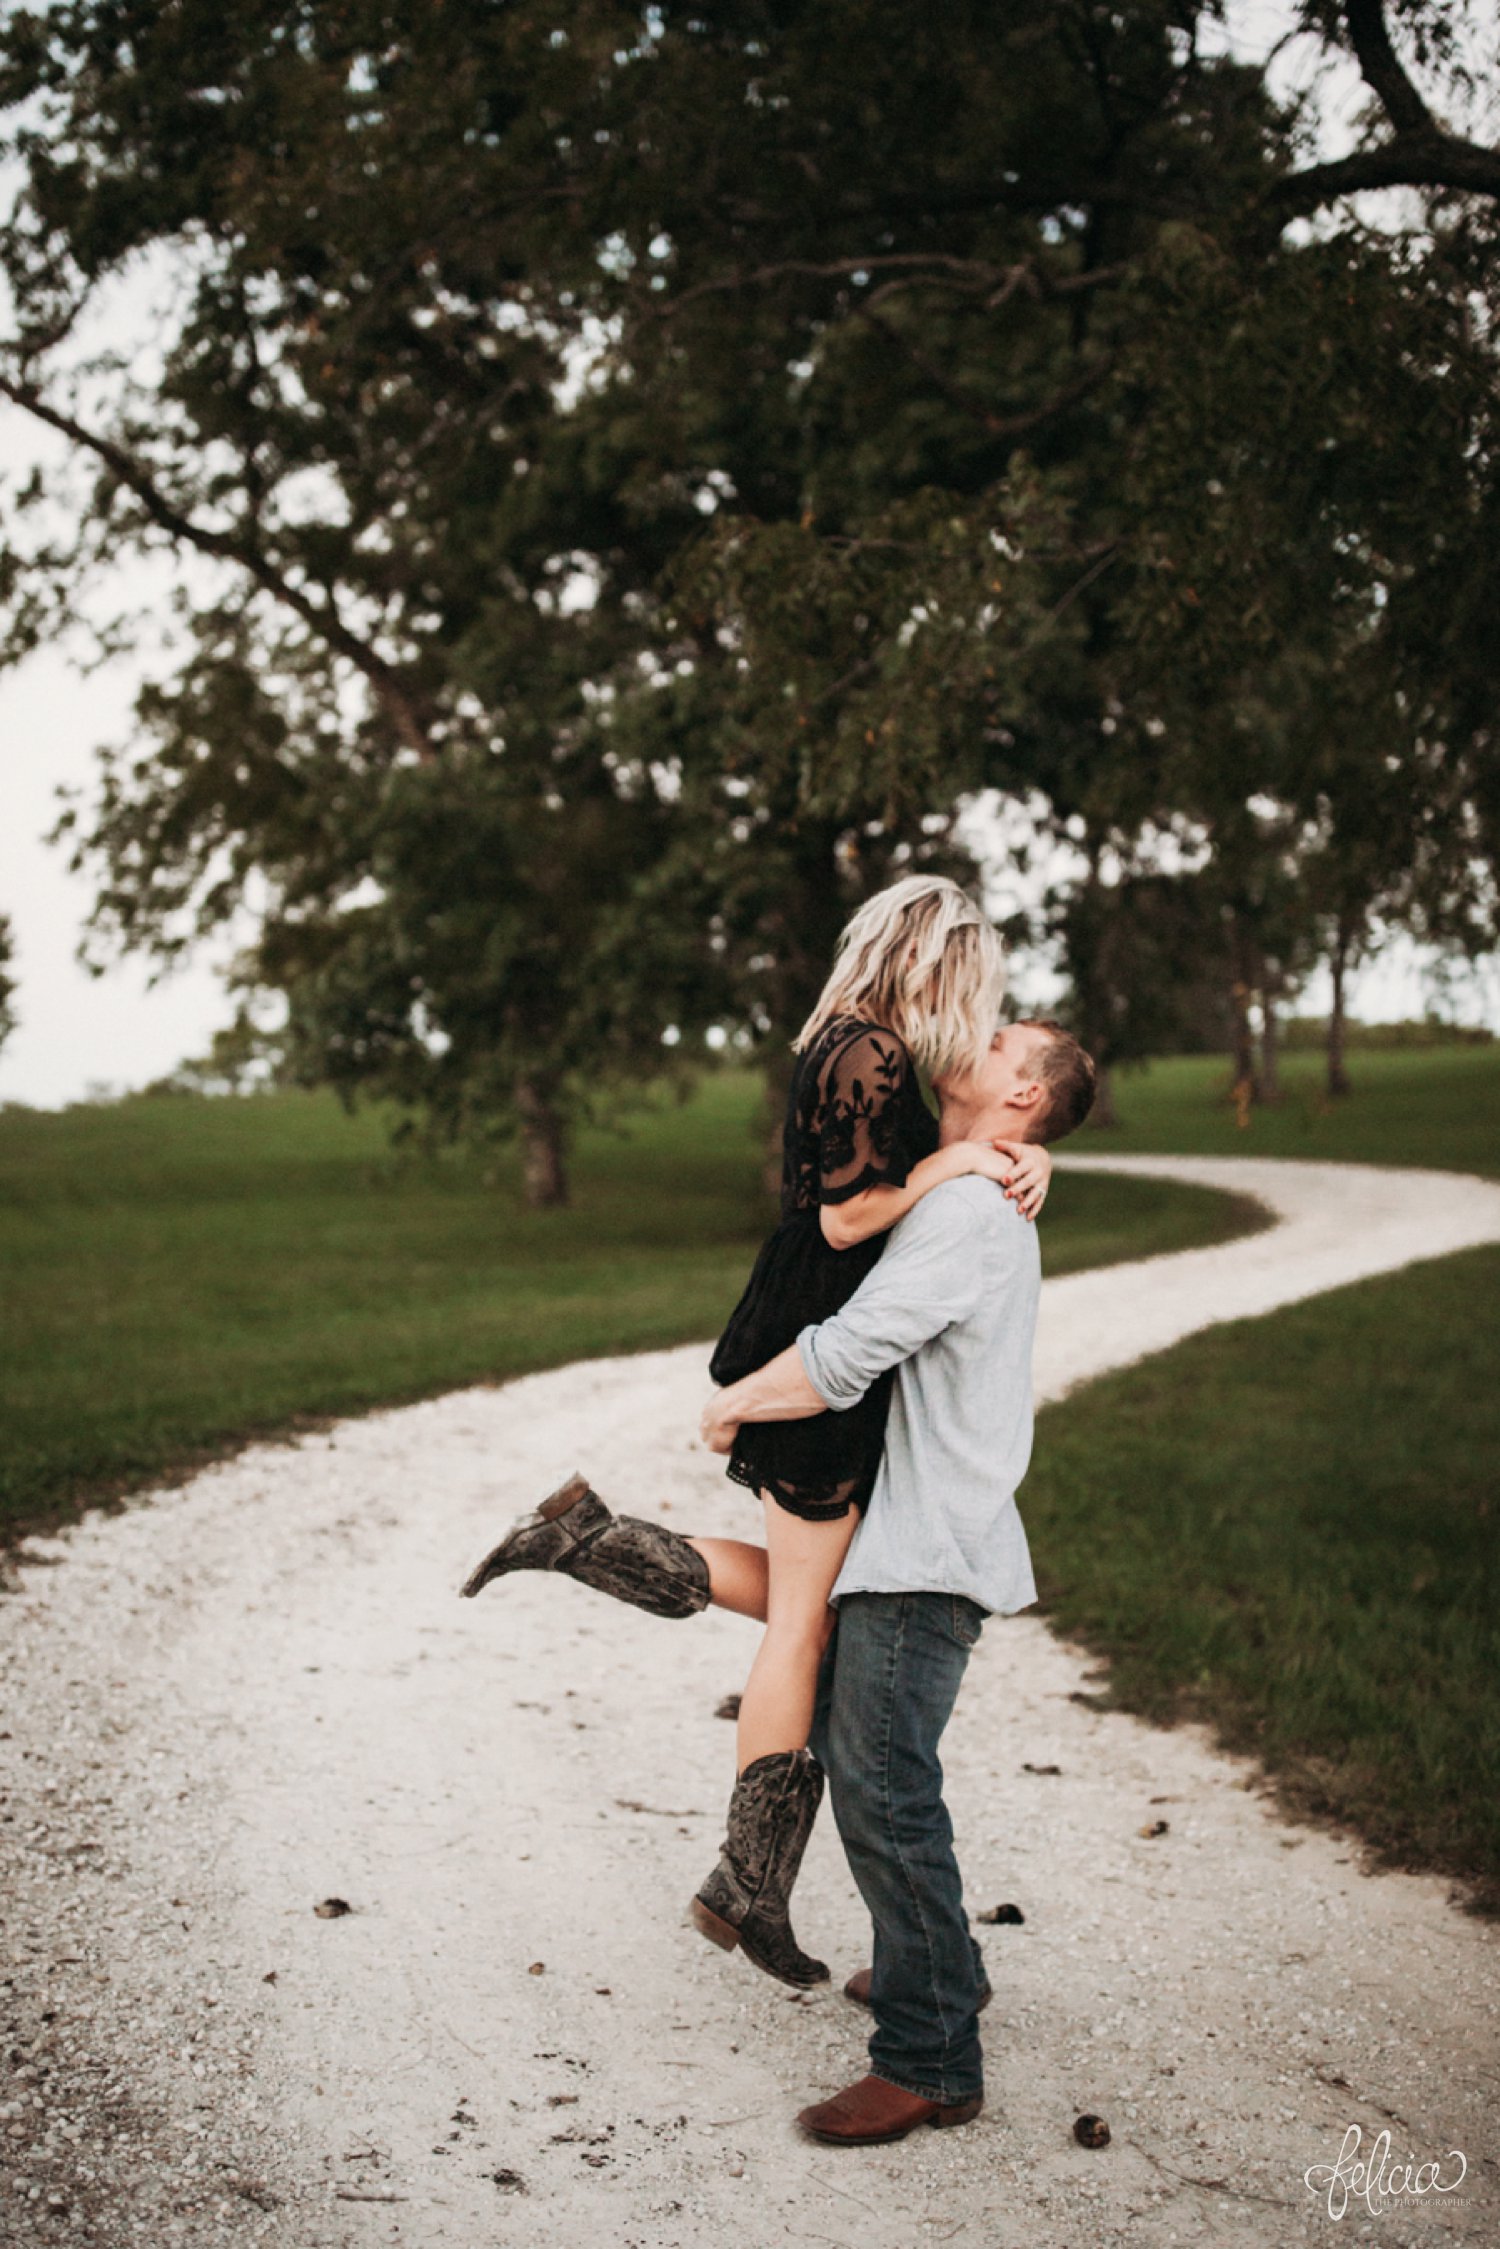 images by feliciathephotographer.com | destination wedding photographer | engagement | farmhouse | country | kansas city | sweet southern | black eyelet romper | unique halo diamond ring | casual | black boots | amazon | cowboy | red nails | nature | black and white | gravel road | 